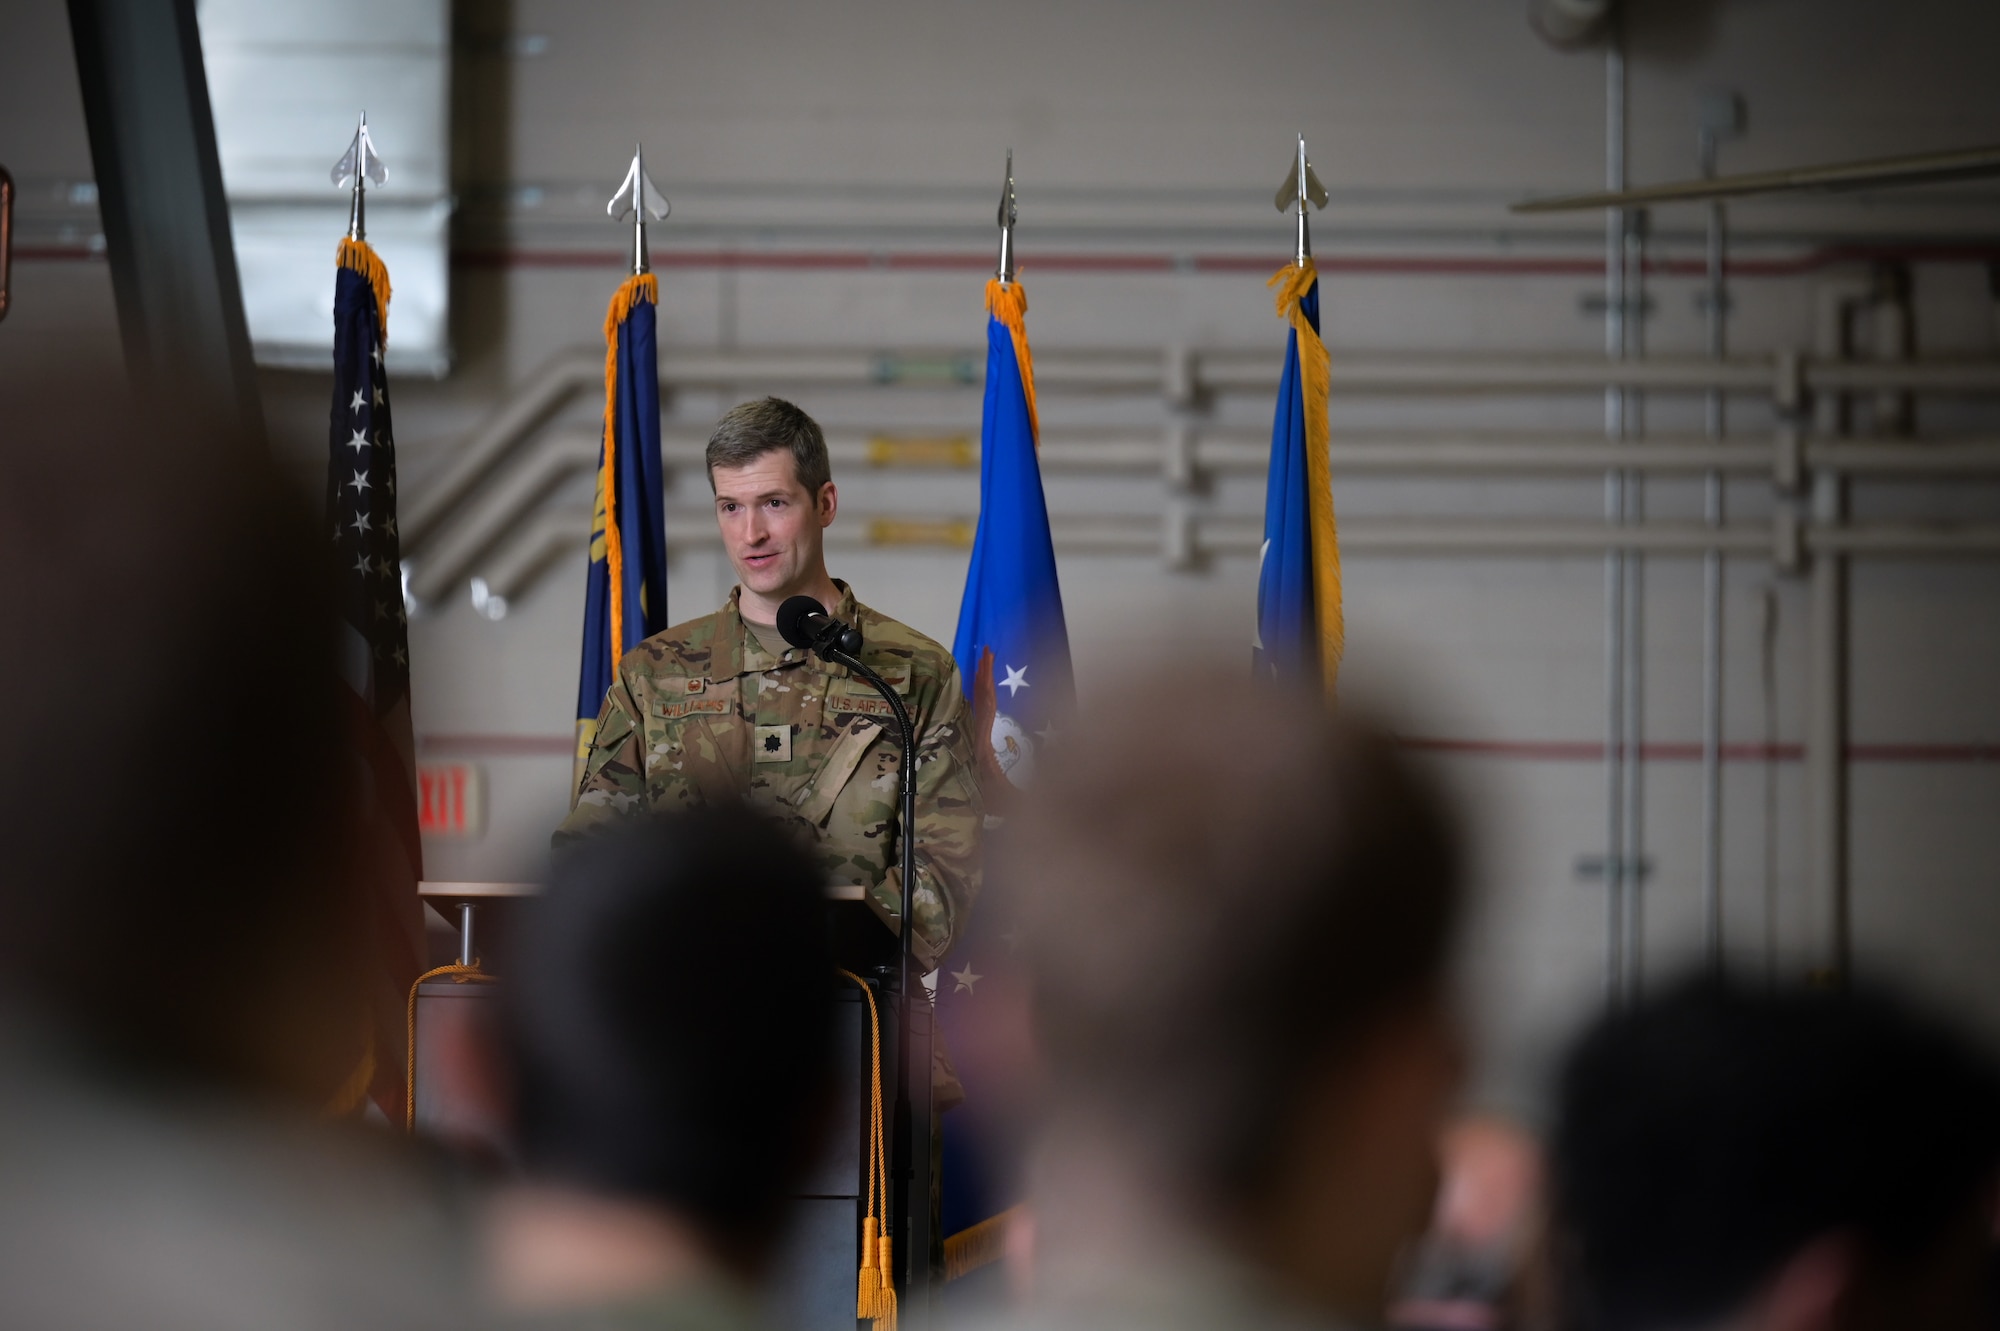 A man in military uniform stands in front of four blue flags with yellow tassles.